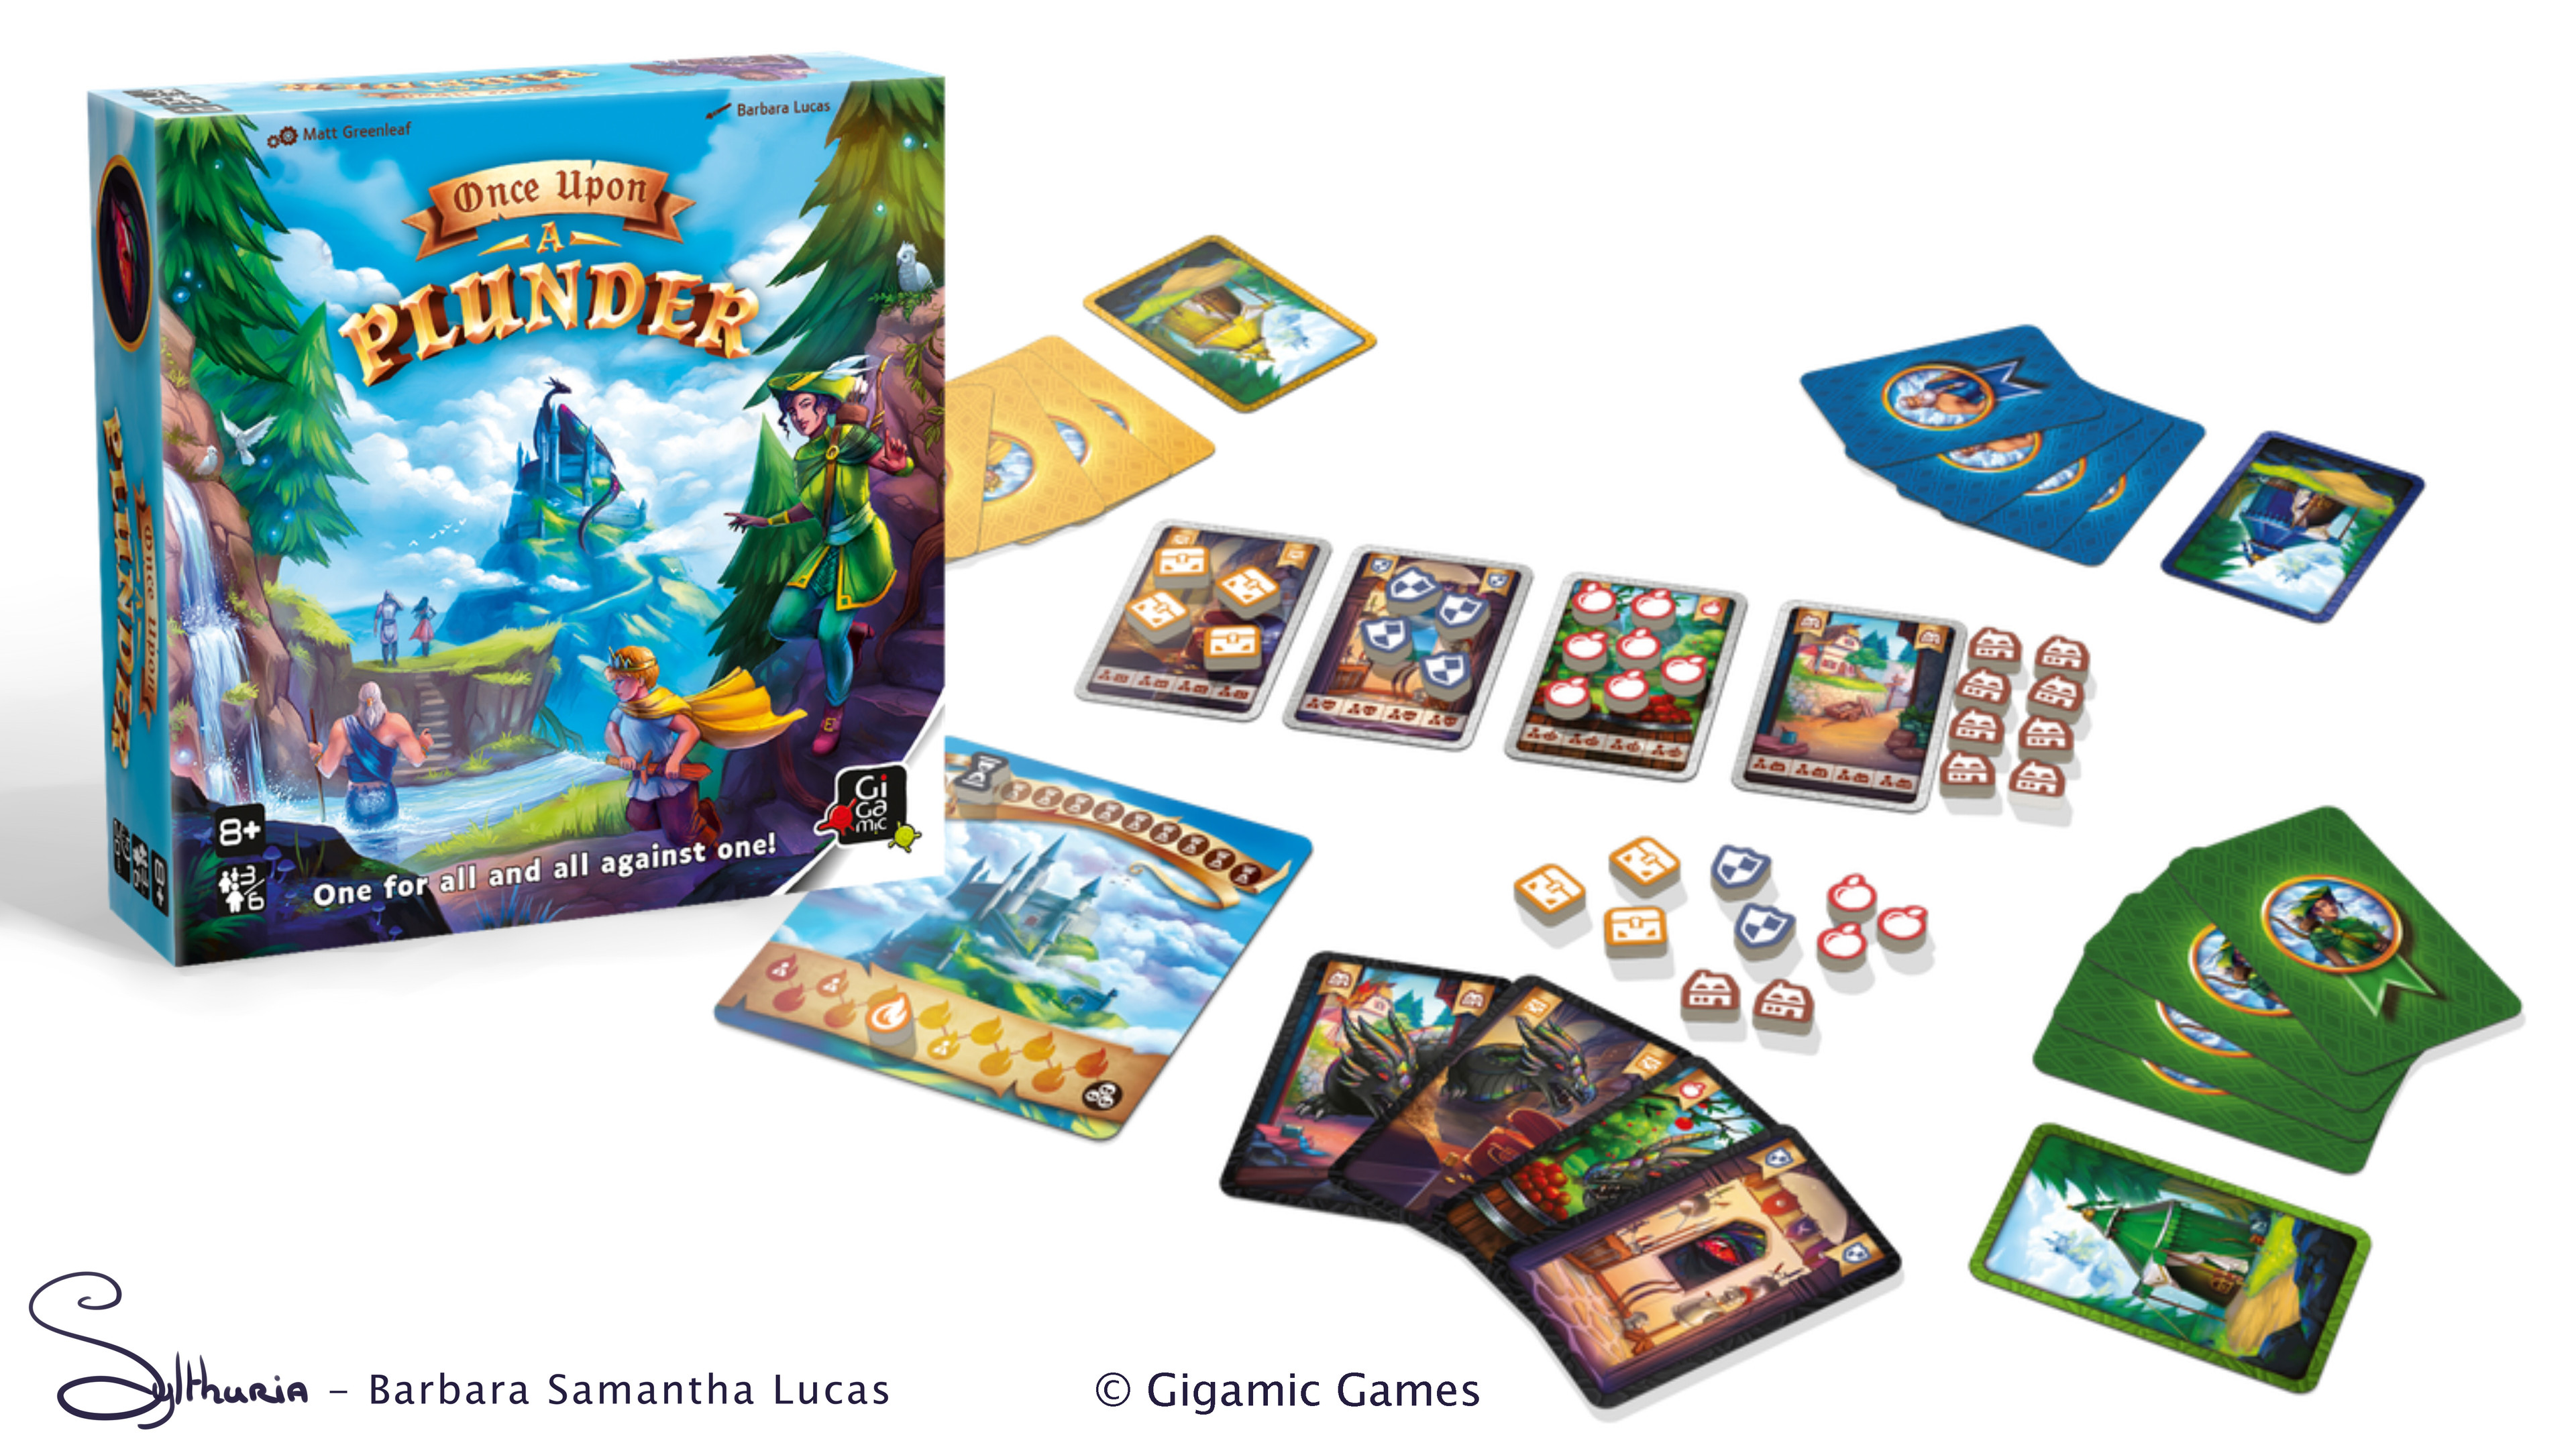 Final game, marketing images